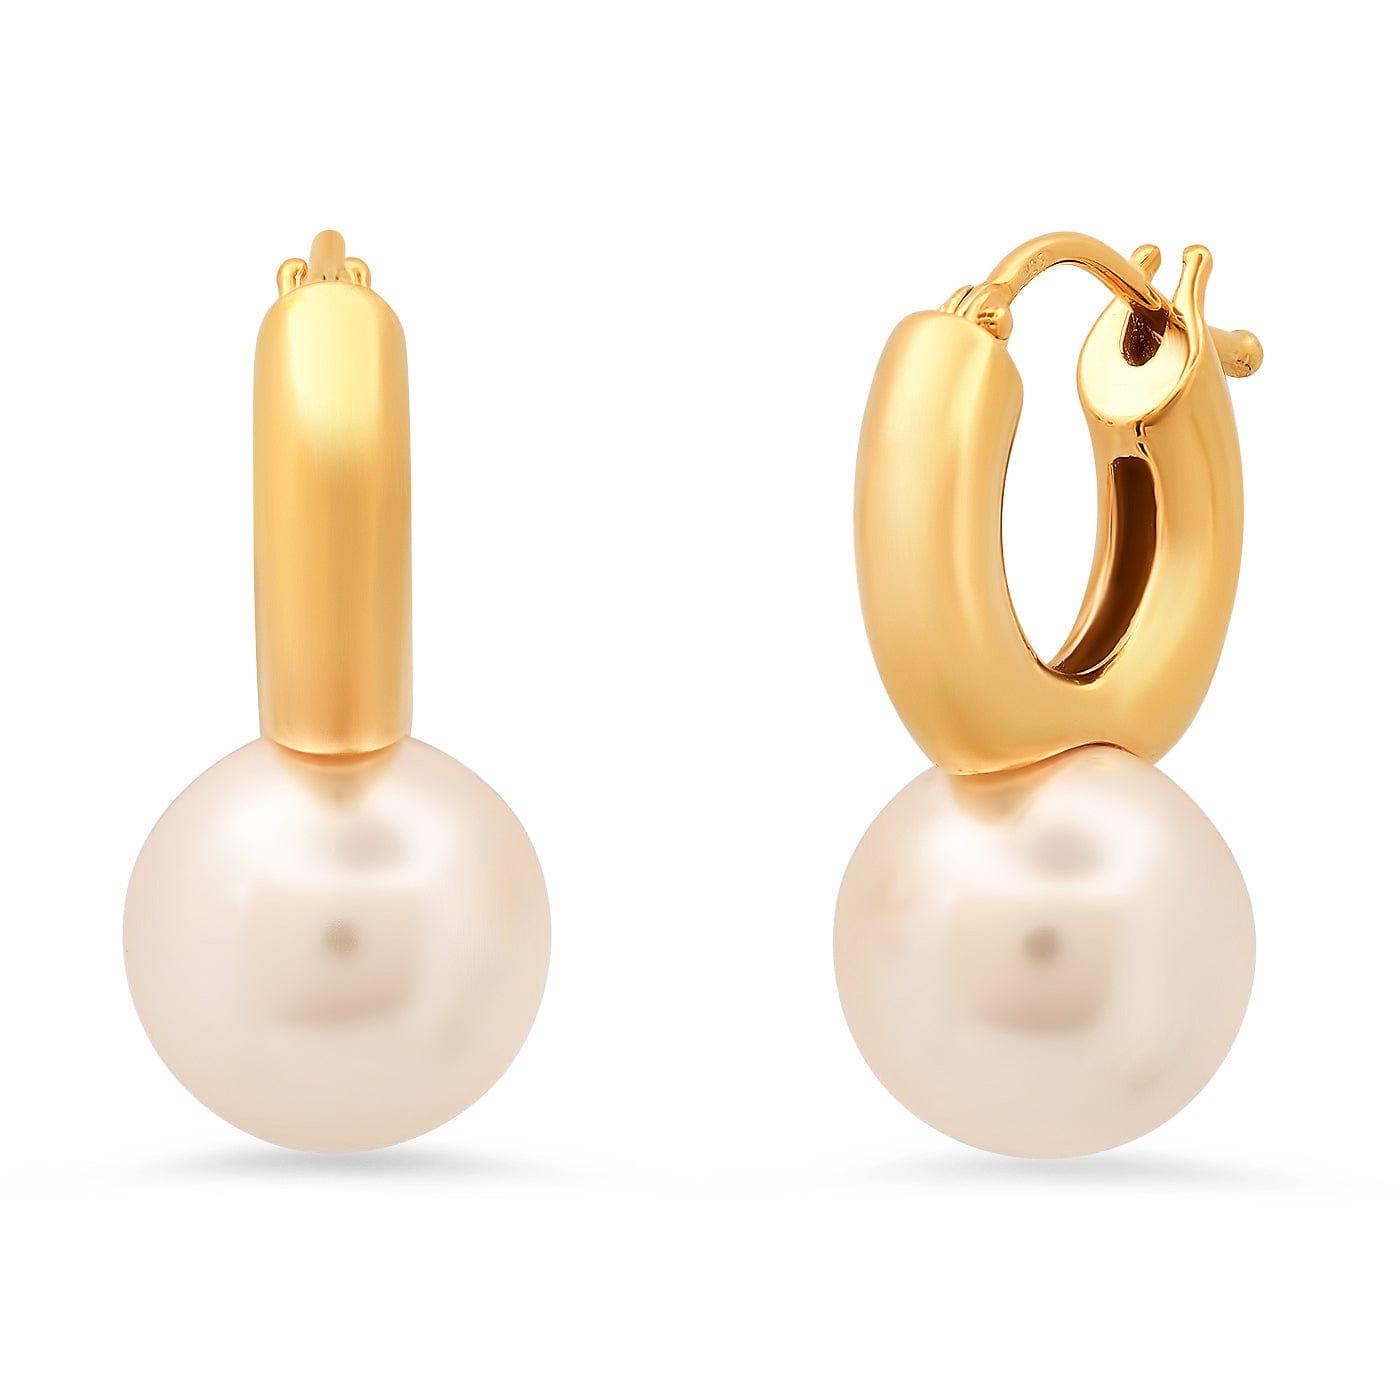 TAI JEWELRY Earrings Gold Vermeil Huggie with Large Pearl Charm